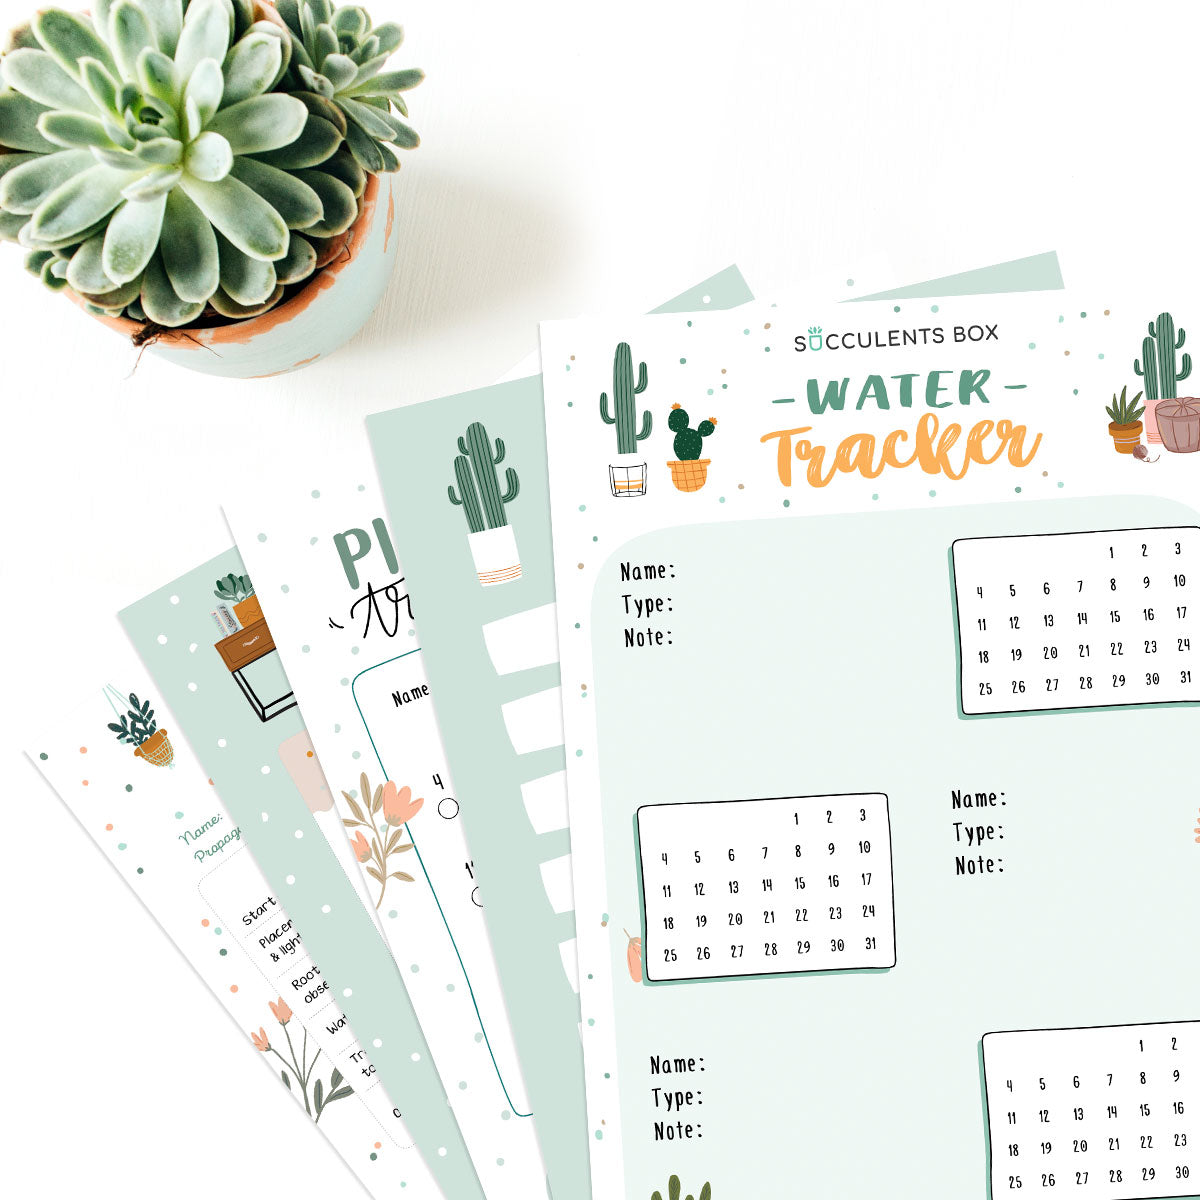 Printable Succulent Bullet Journal for free, Succulent gift for plant lovers, Printable for Journal or Planner, Succulent home office decor, Succulent printable template